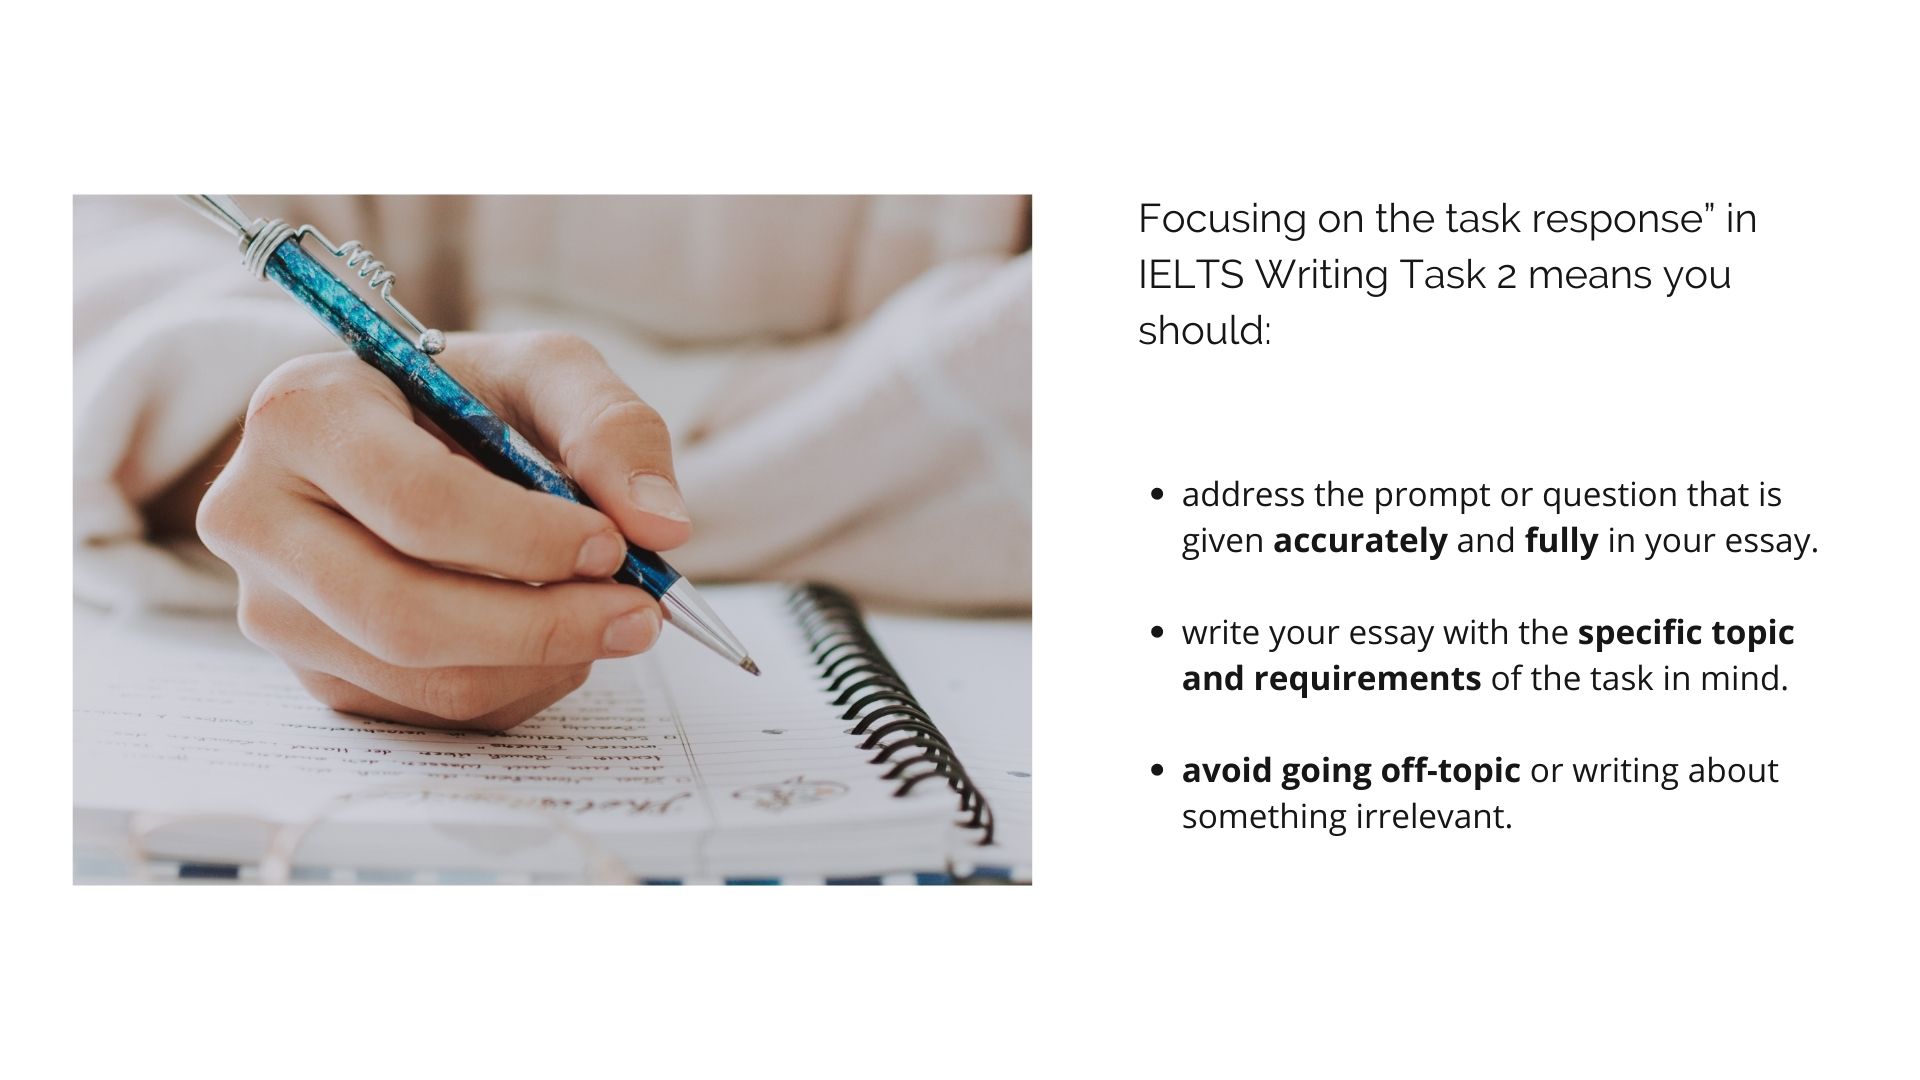 Meaning of “Focusing on the task response” in IELTS Writing Task 2.